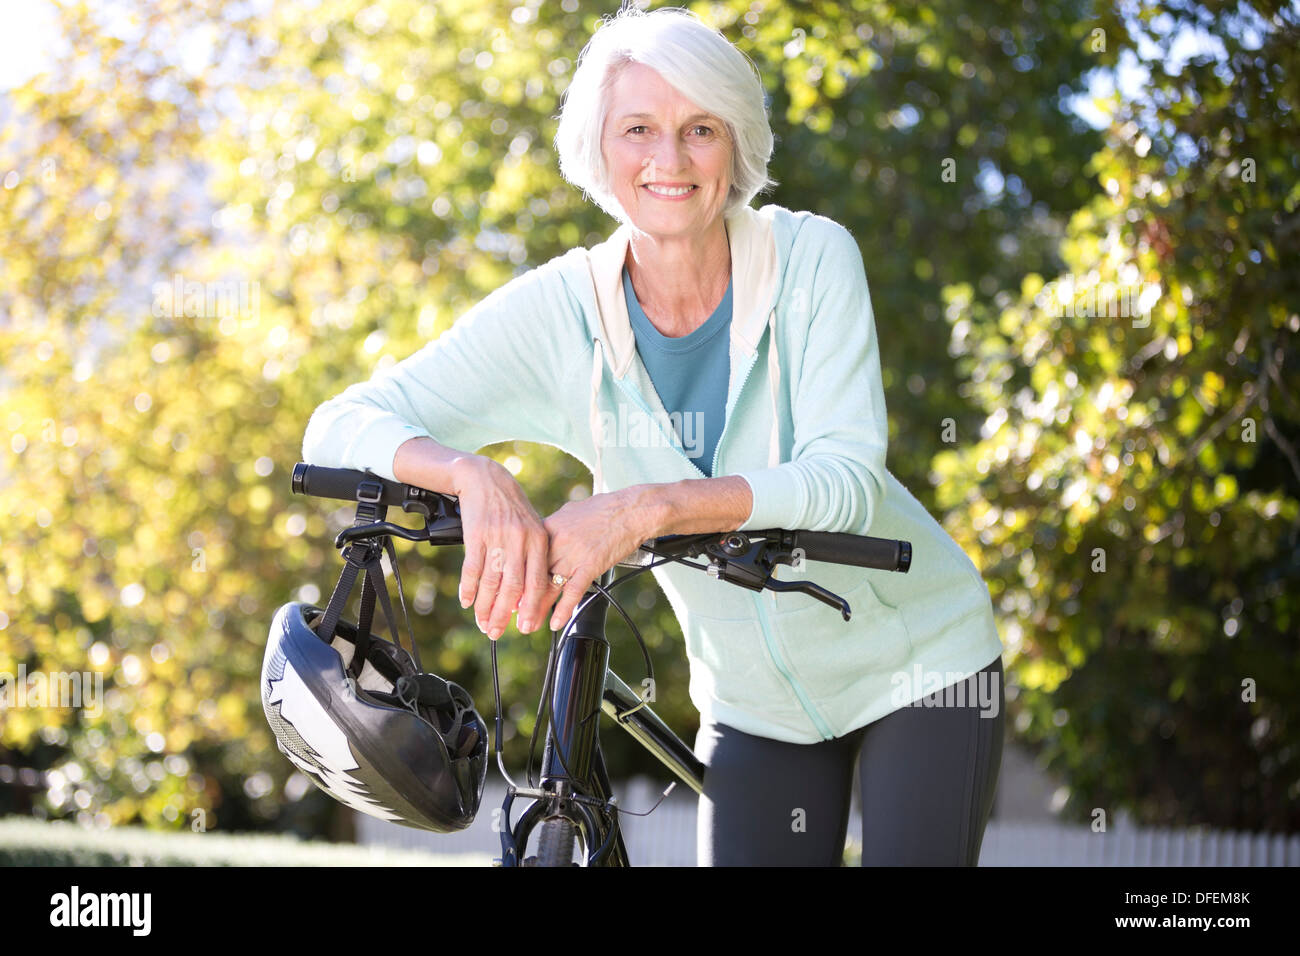 Portrait of senior woman leaning on bicycle Banque D'Images